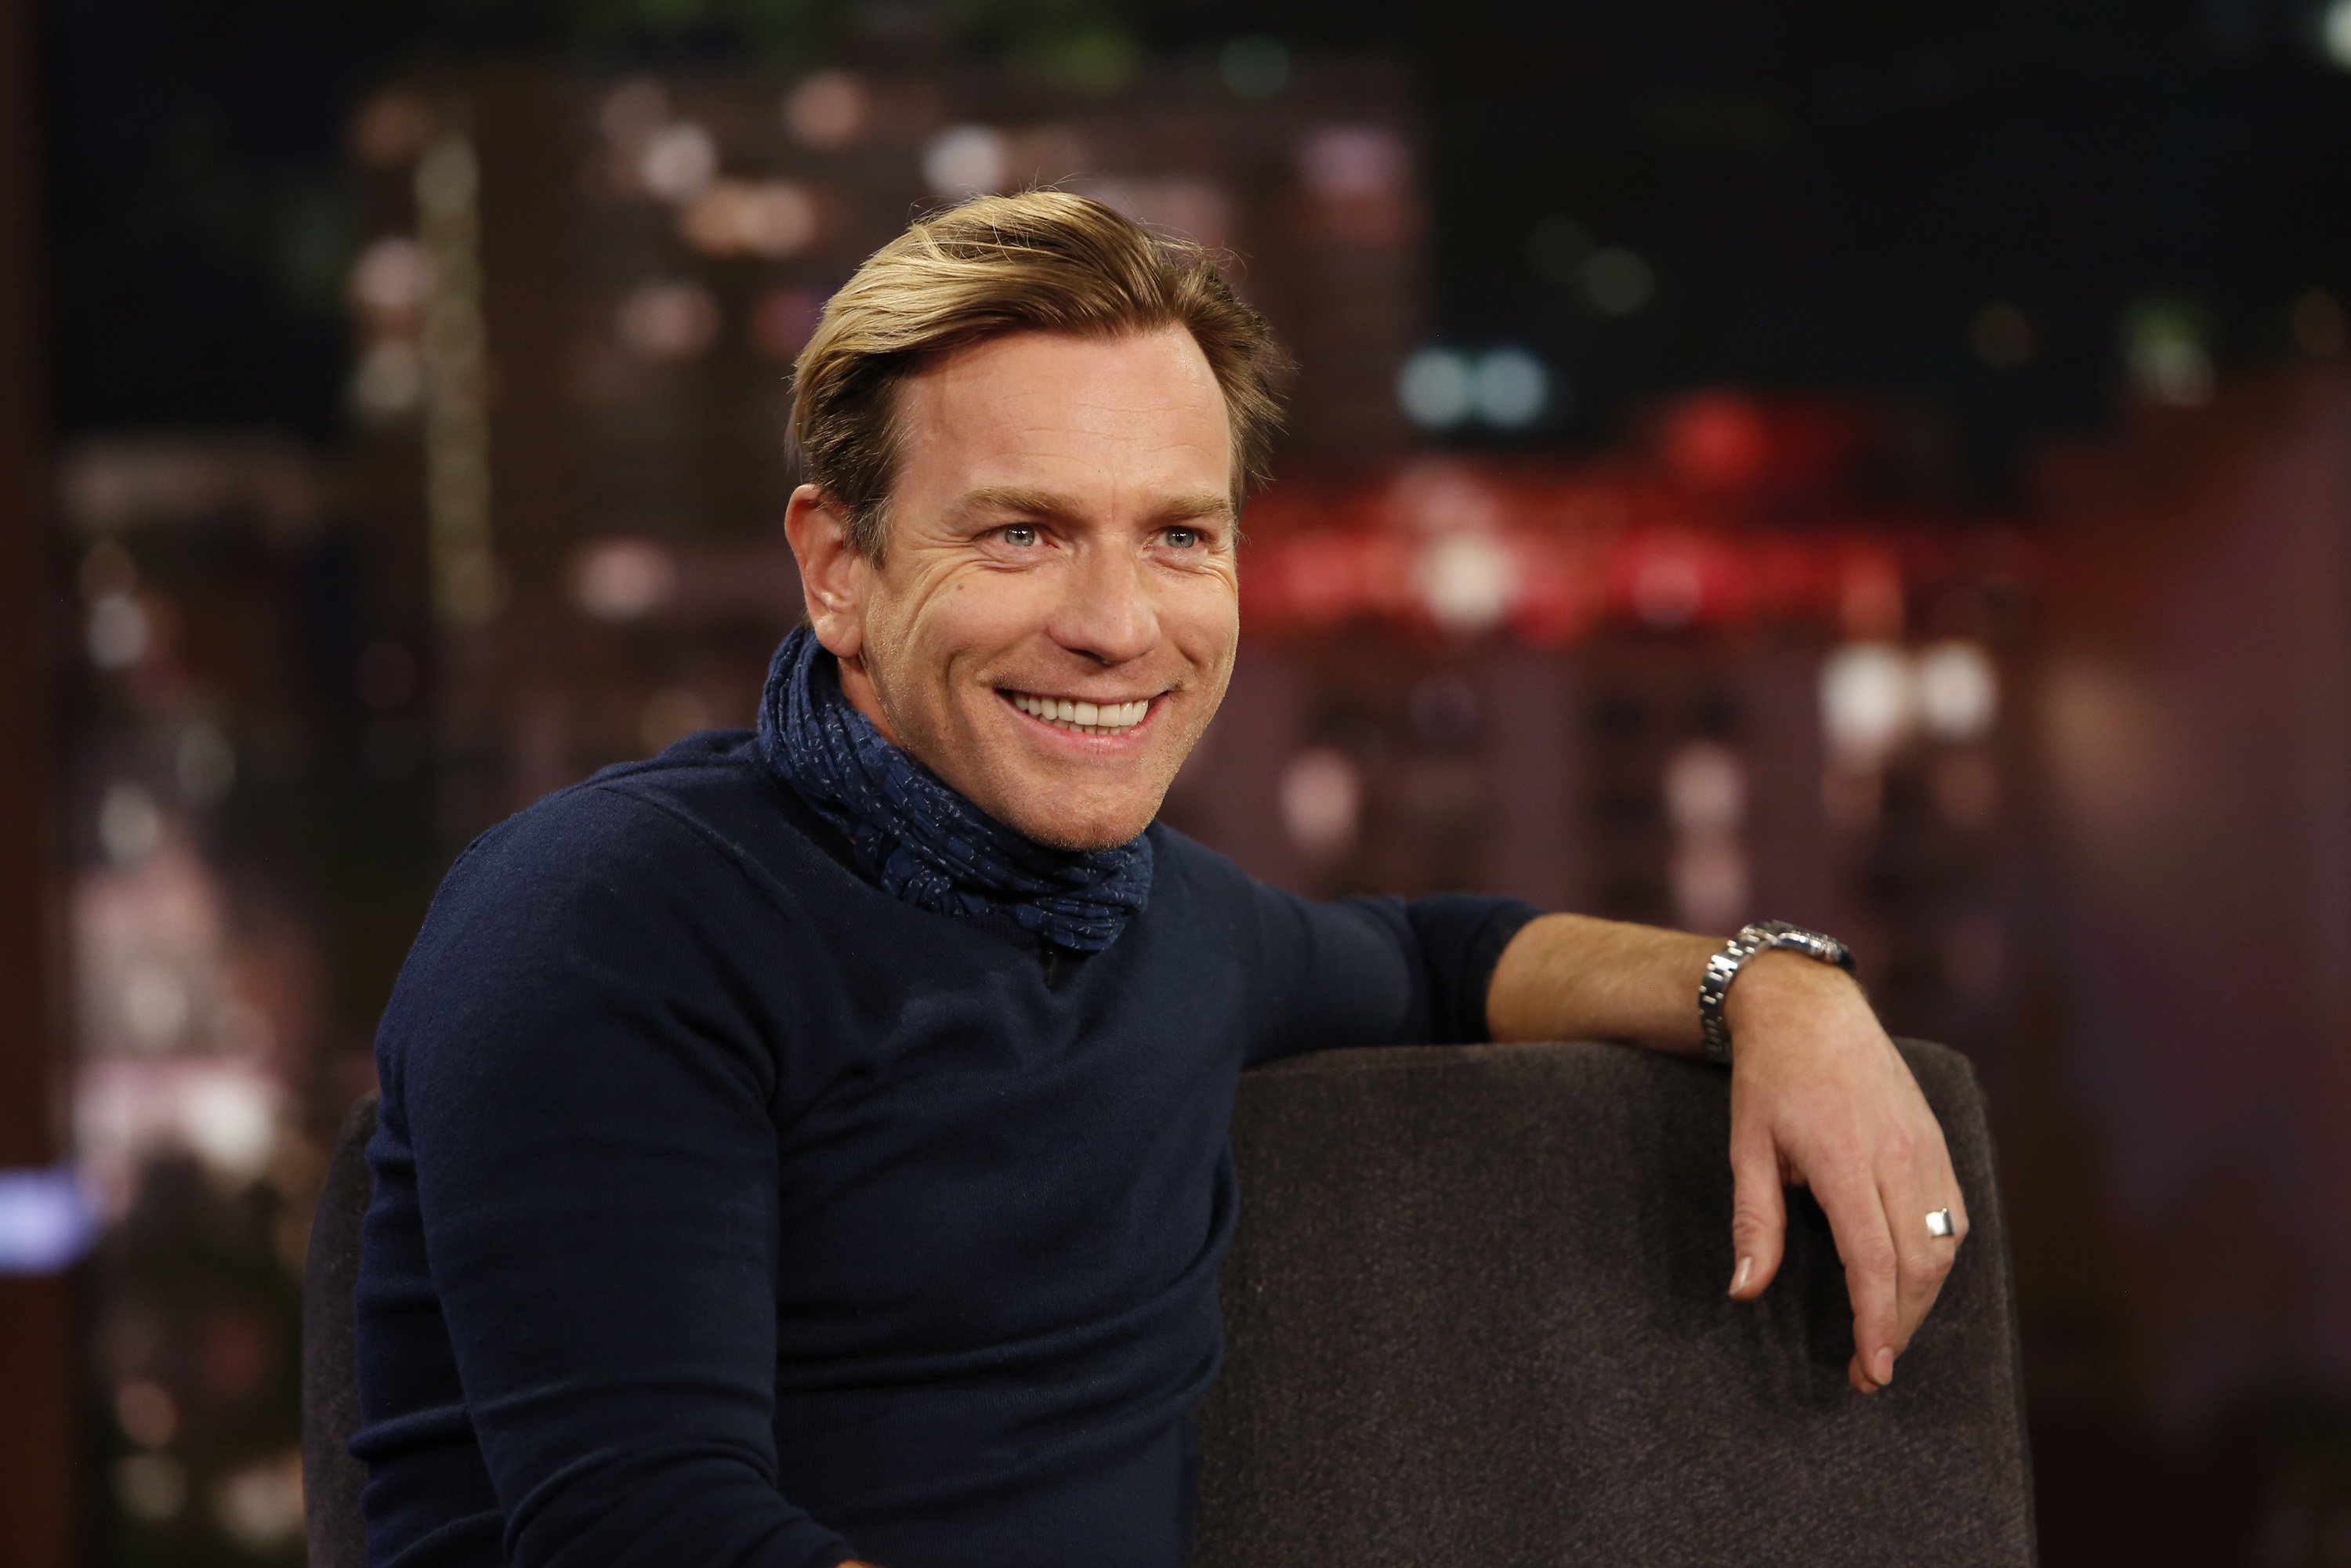 Ewan McGregor serves as guest at the "Jimmy Kimmel Live" show on January 29, 2016. | Source: Getty Images